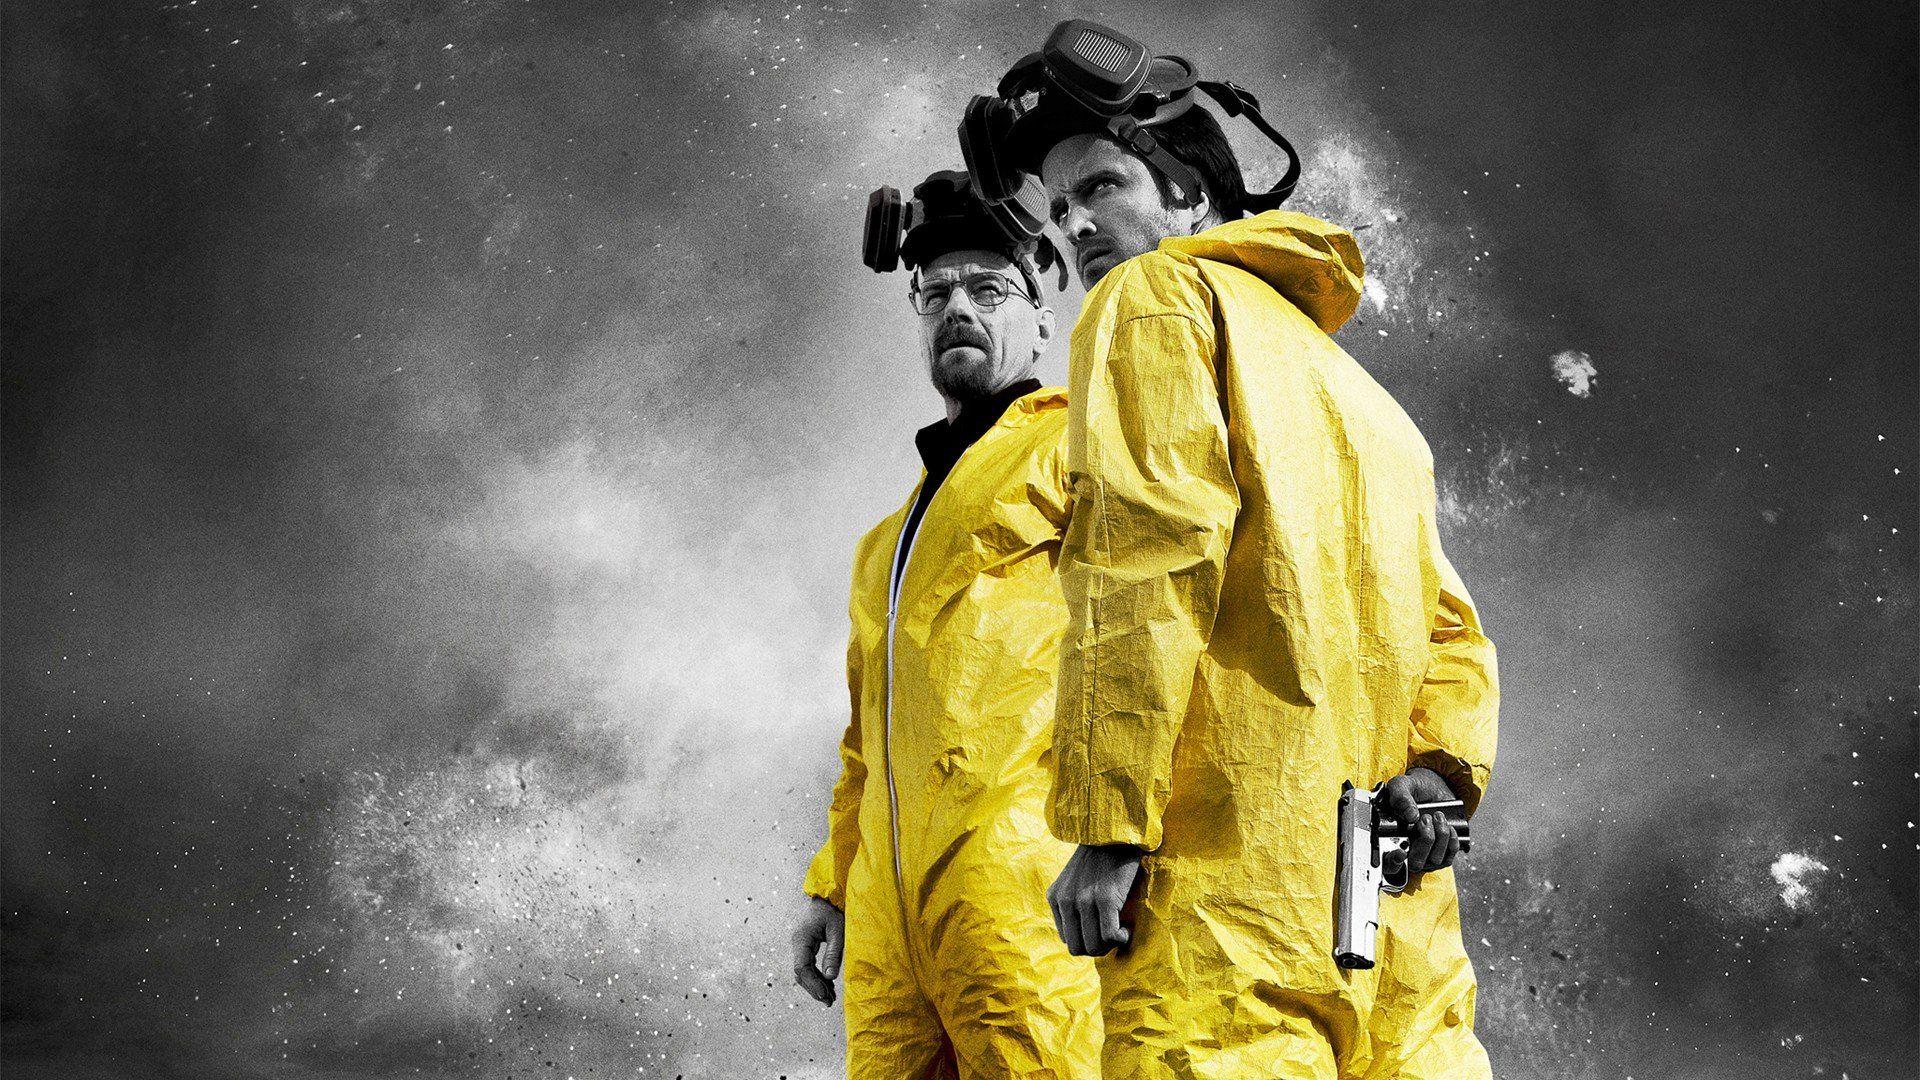 Breaking Bad, Selective coloring, Gas masks, Walter White, Jesse